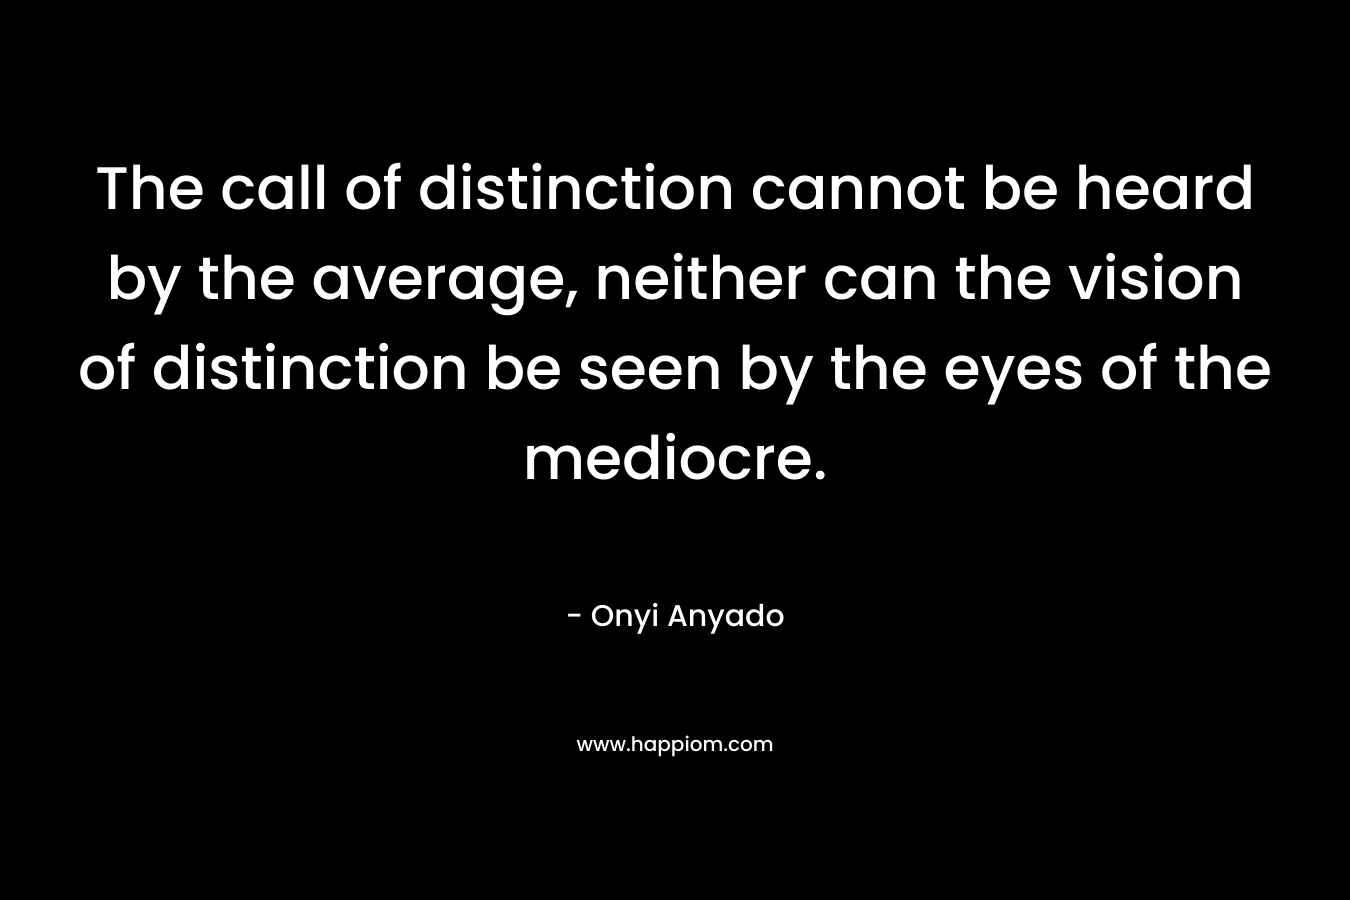 The call of distinction cannot be heard by the average, neither can the vision of distinction be seen by the eyes of the mediocre. – Onyi Anyado